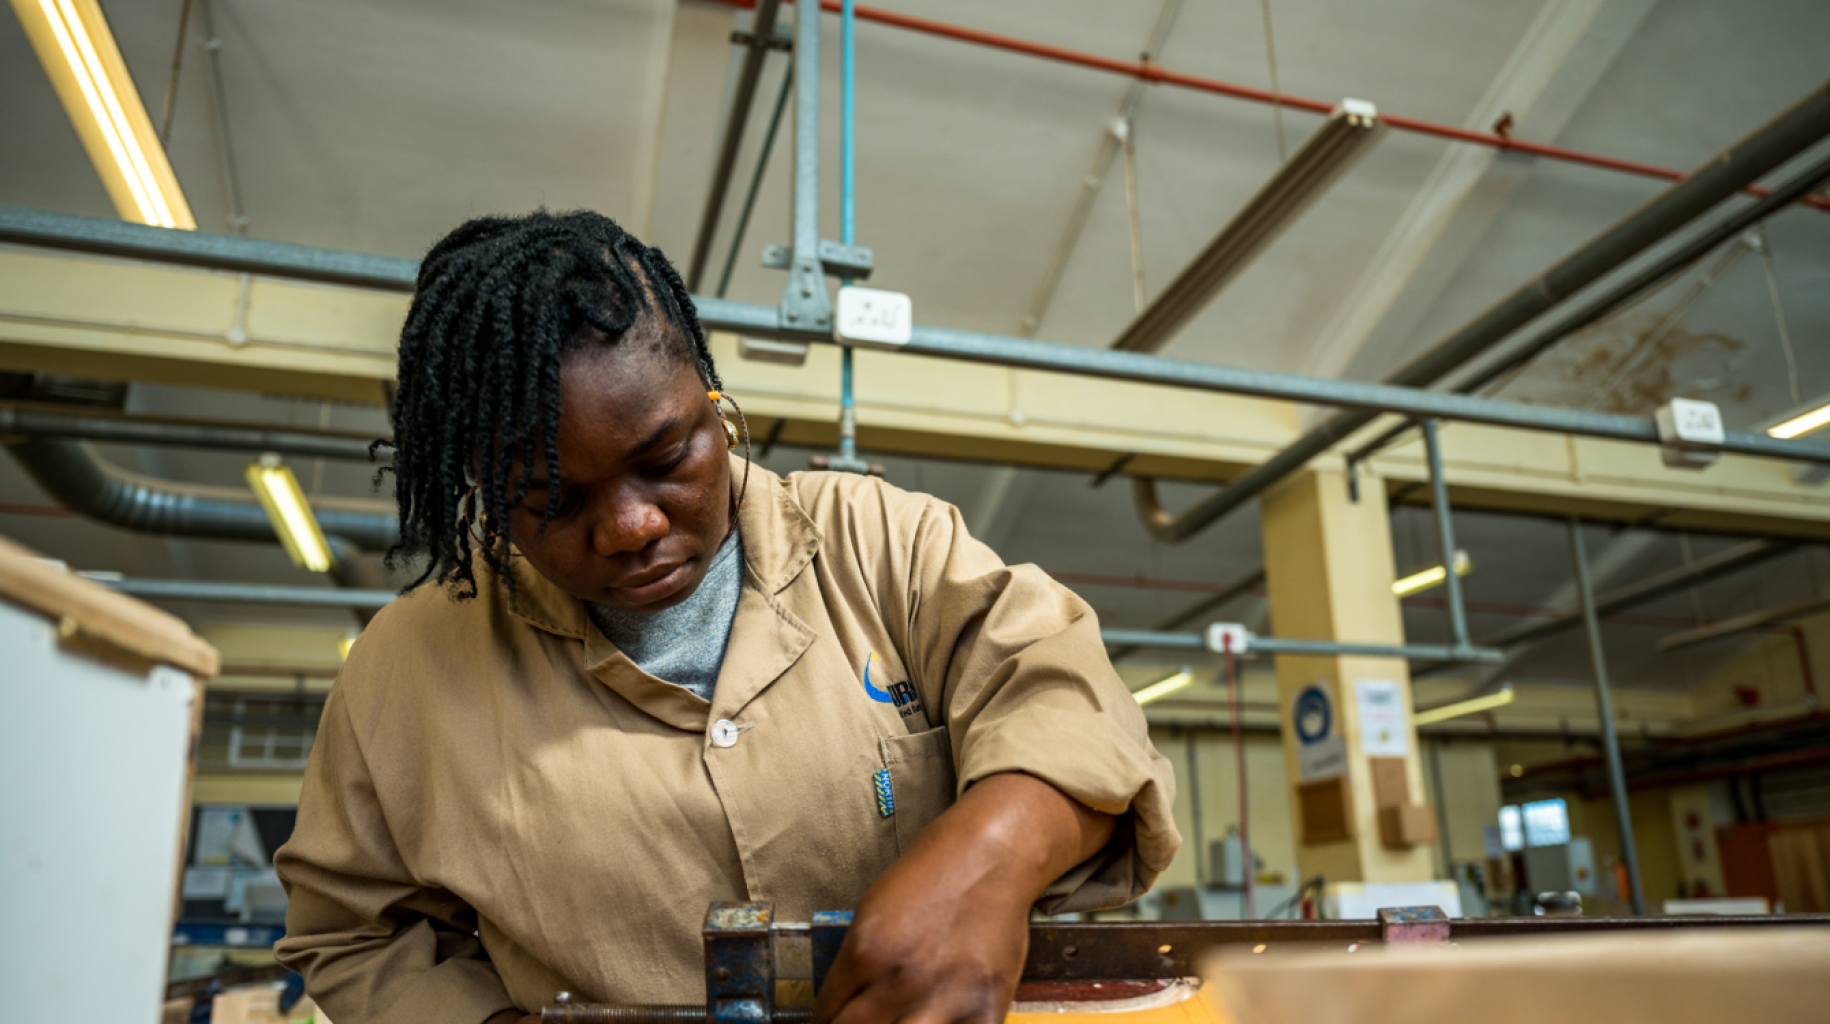 young woman in beige shirt works at a carpentry station